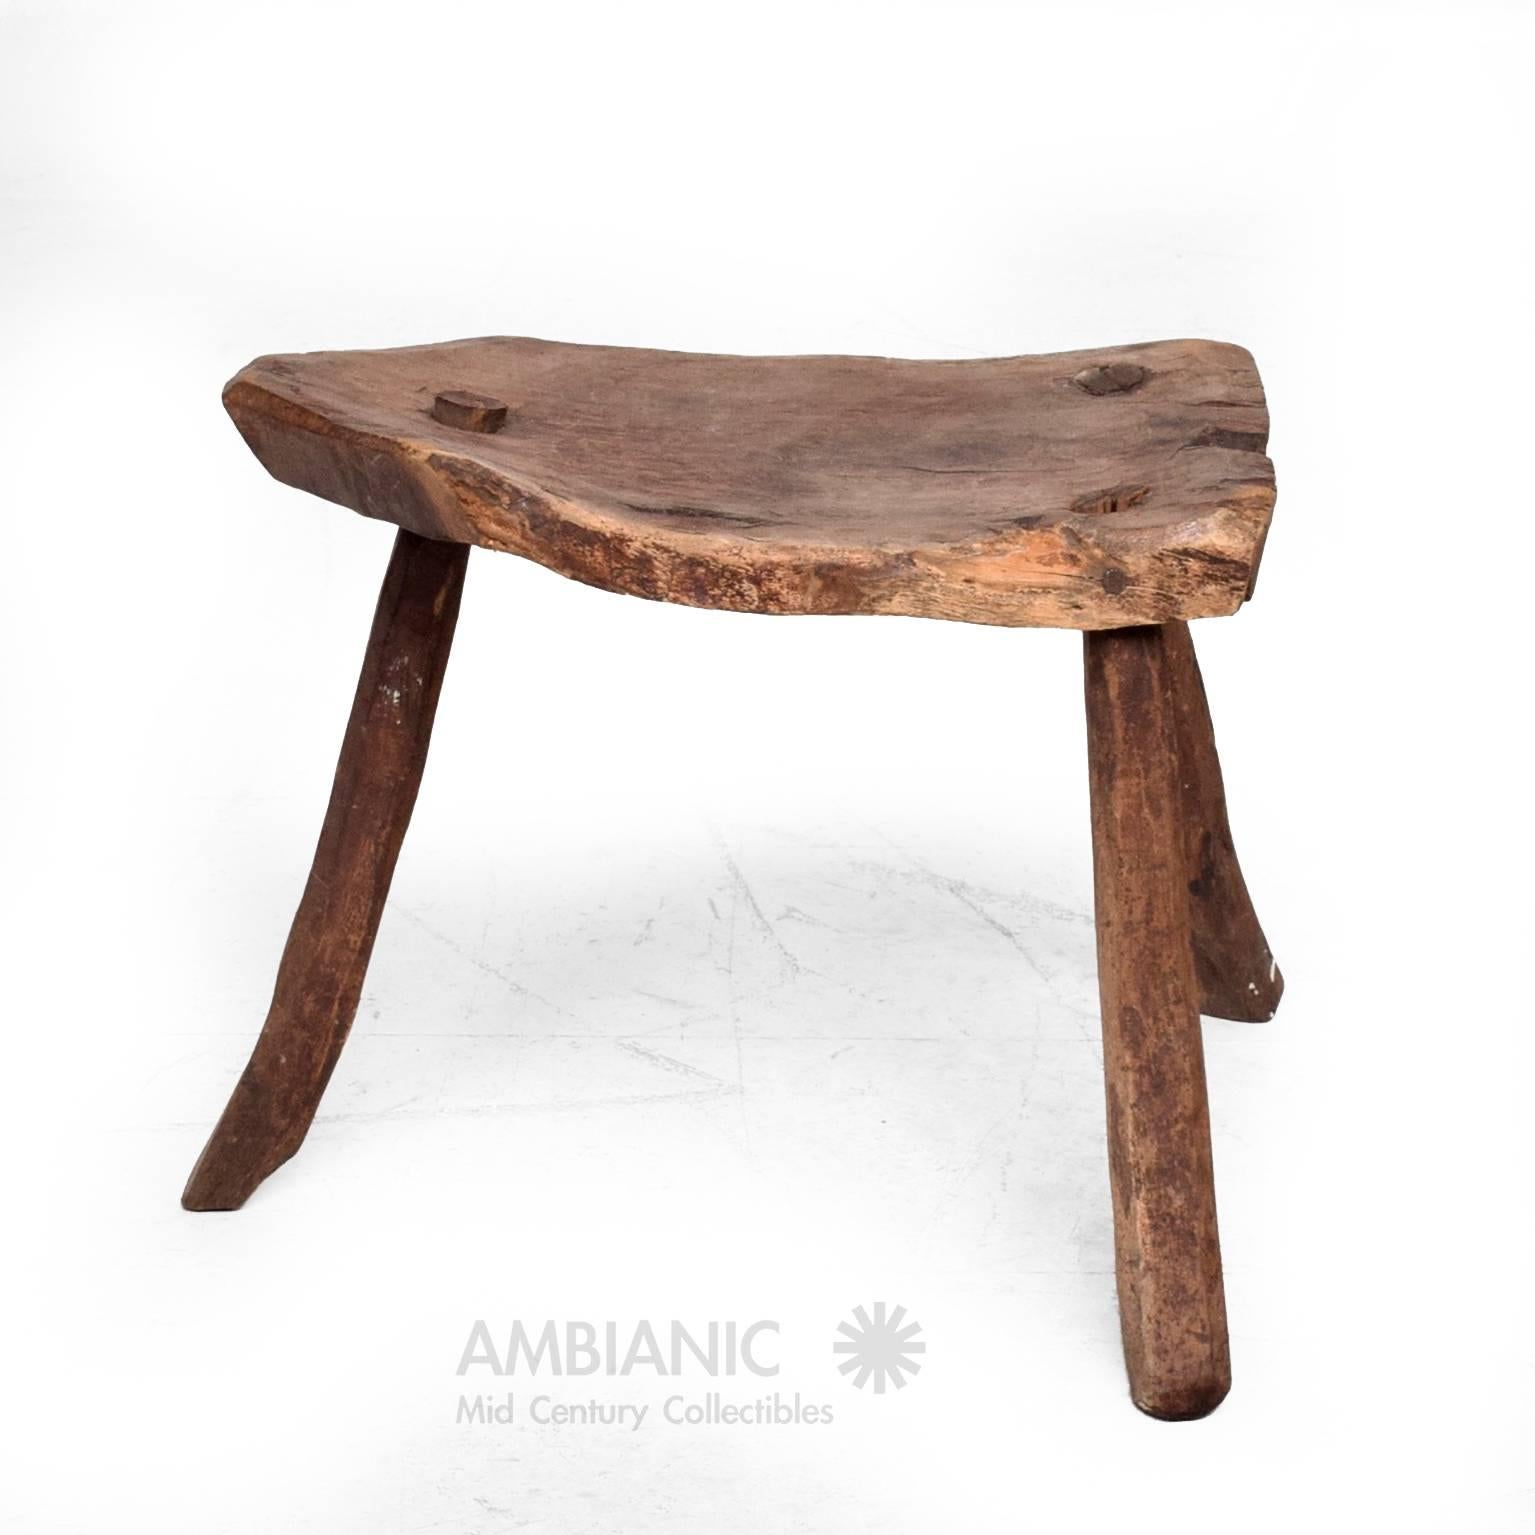 For your consideration an antique wood stool with three legs.
Great decorative item. Handcrafted in Mexico, circa 1960s.

12 1/4